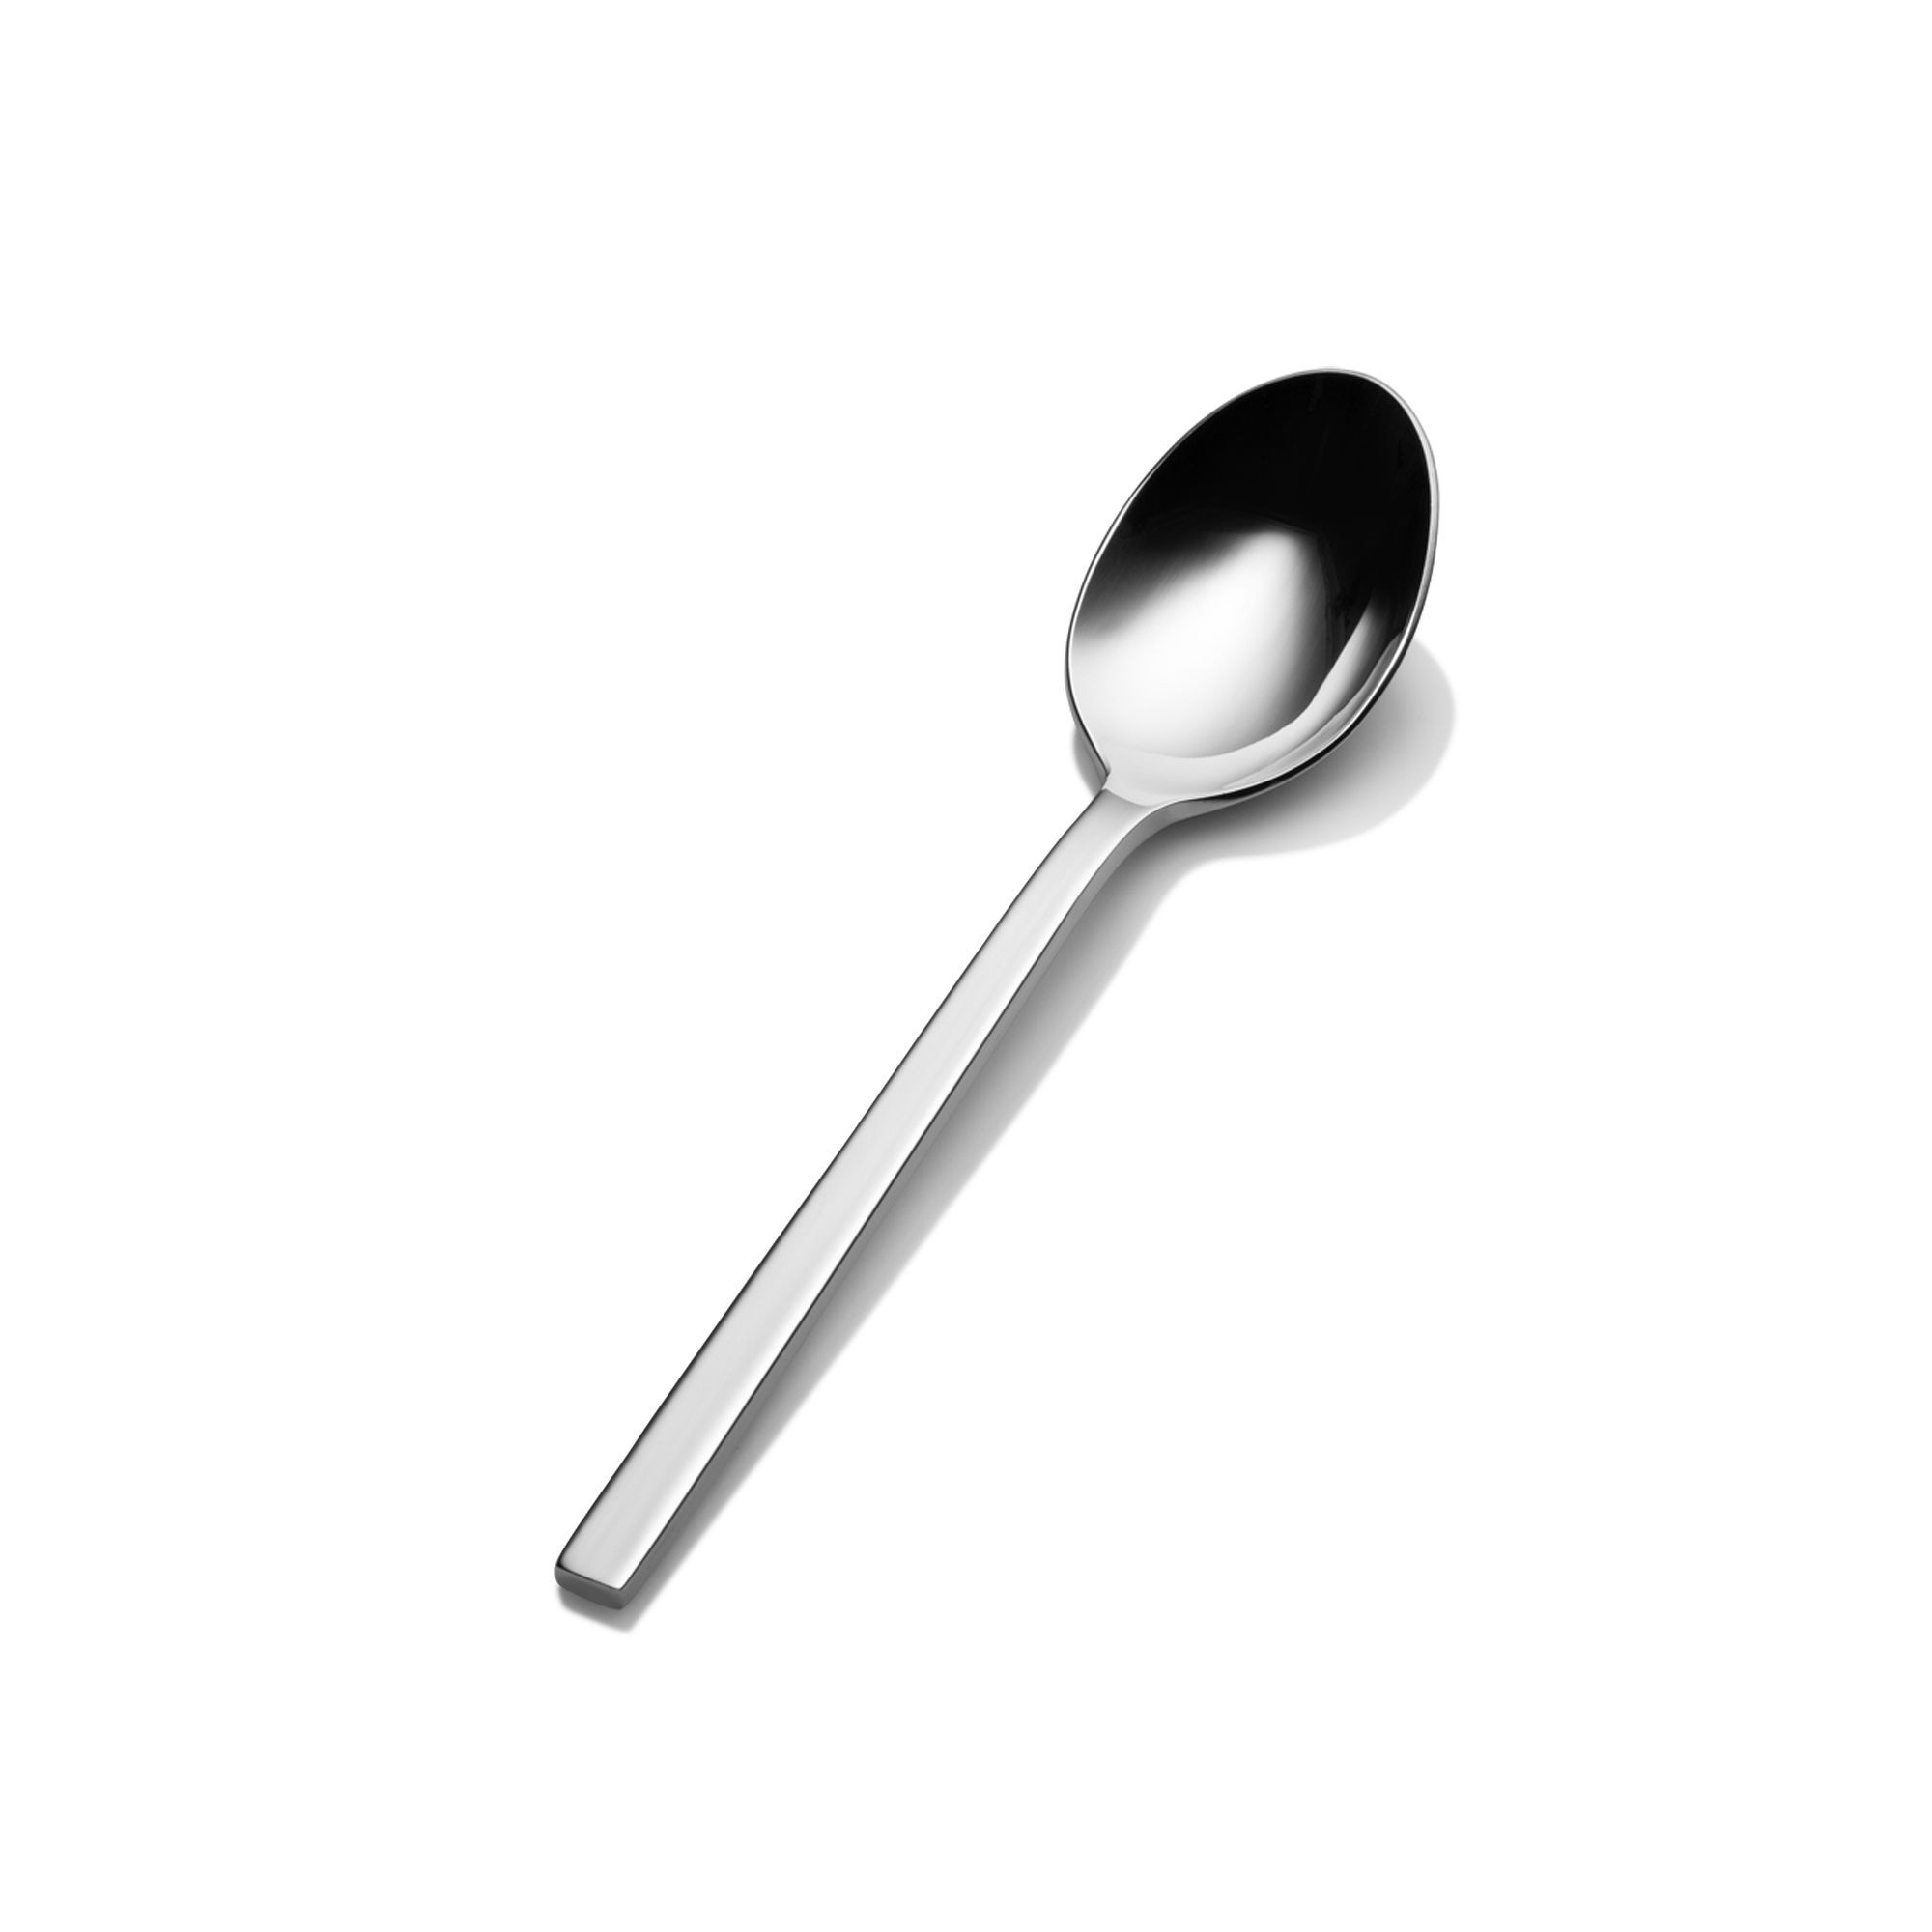 Bon Chef S3804 Milan 18/8 Stainless Steel Serving Spoon